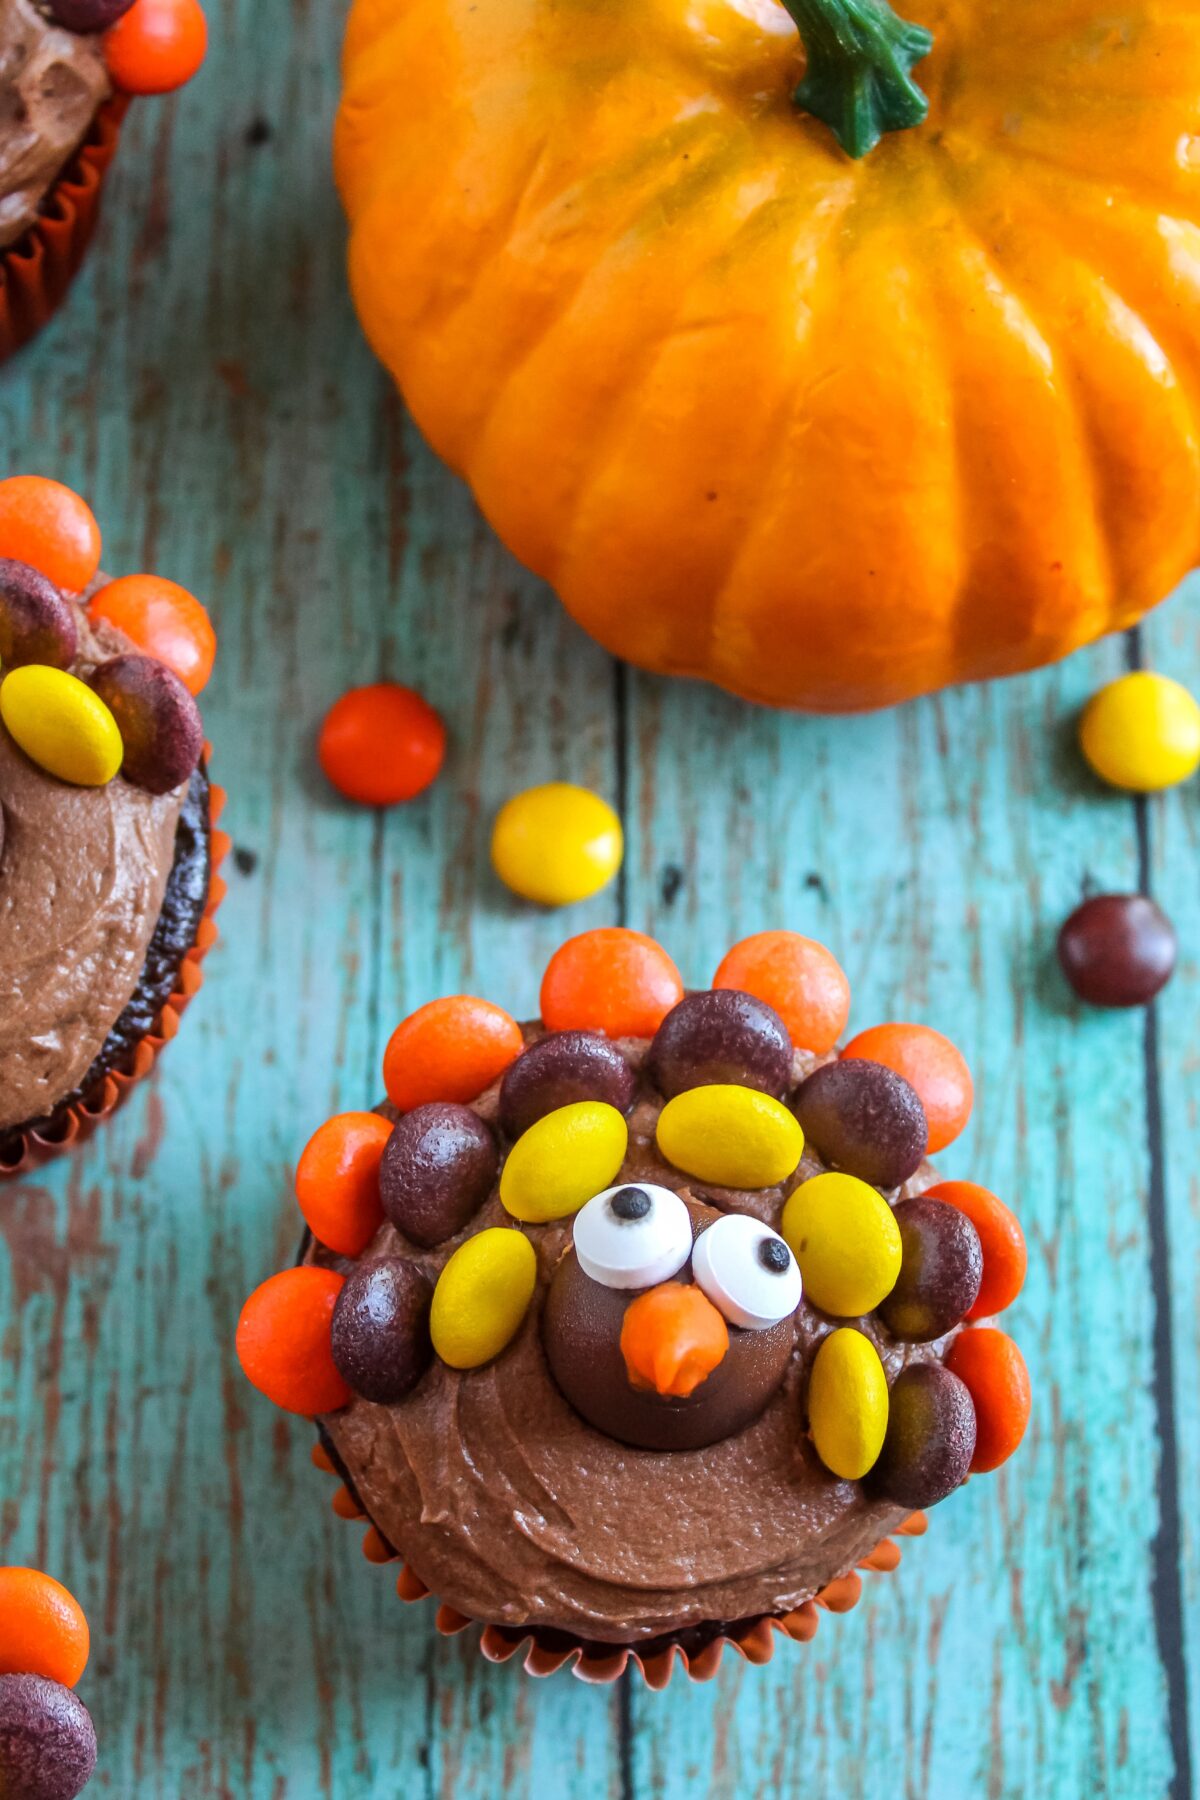 These fun and easy to make Thanksgiving turkey cupcakes will be a hit with kids of all ages. Learn how to decorate cupcakes like turkeys!